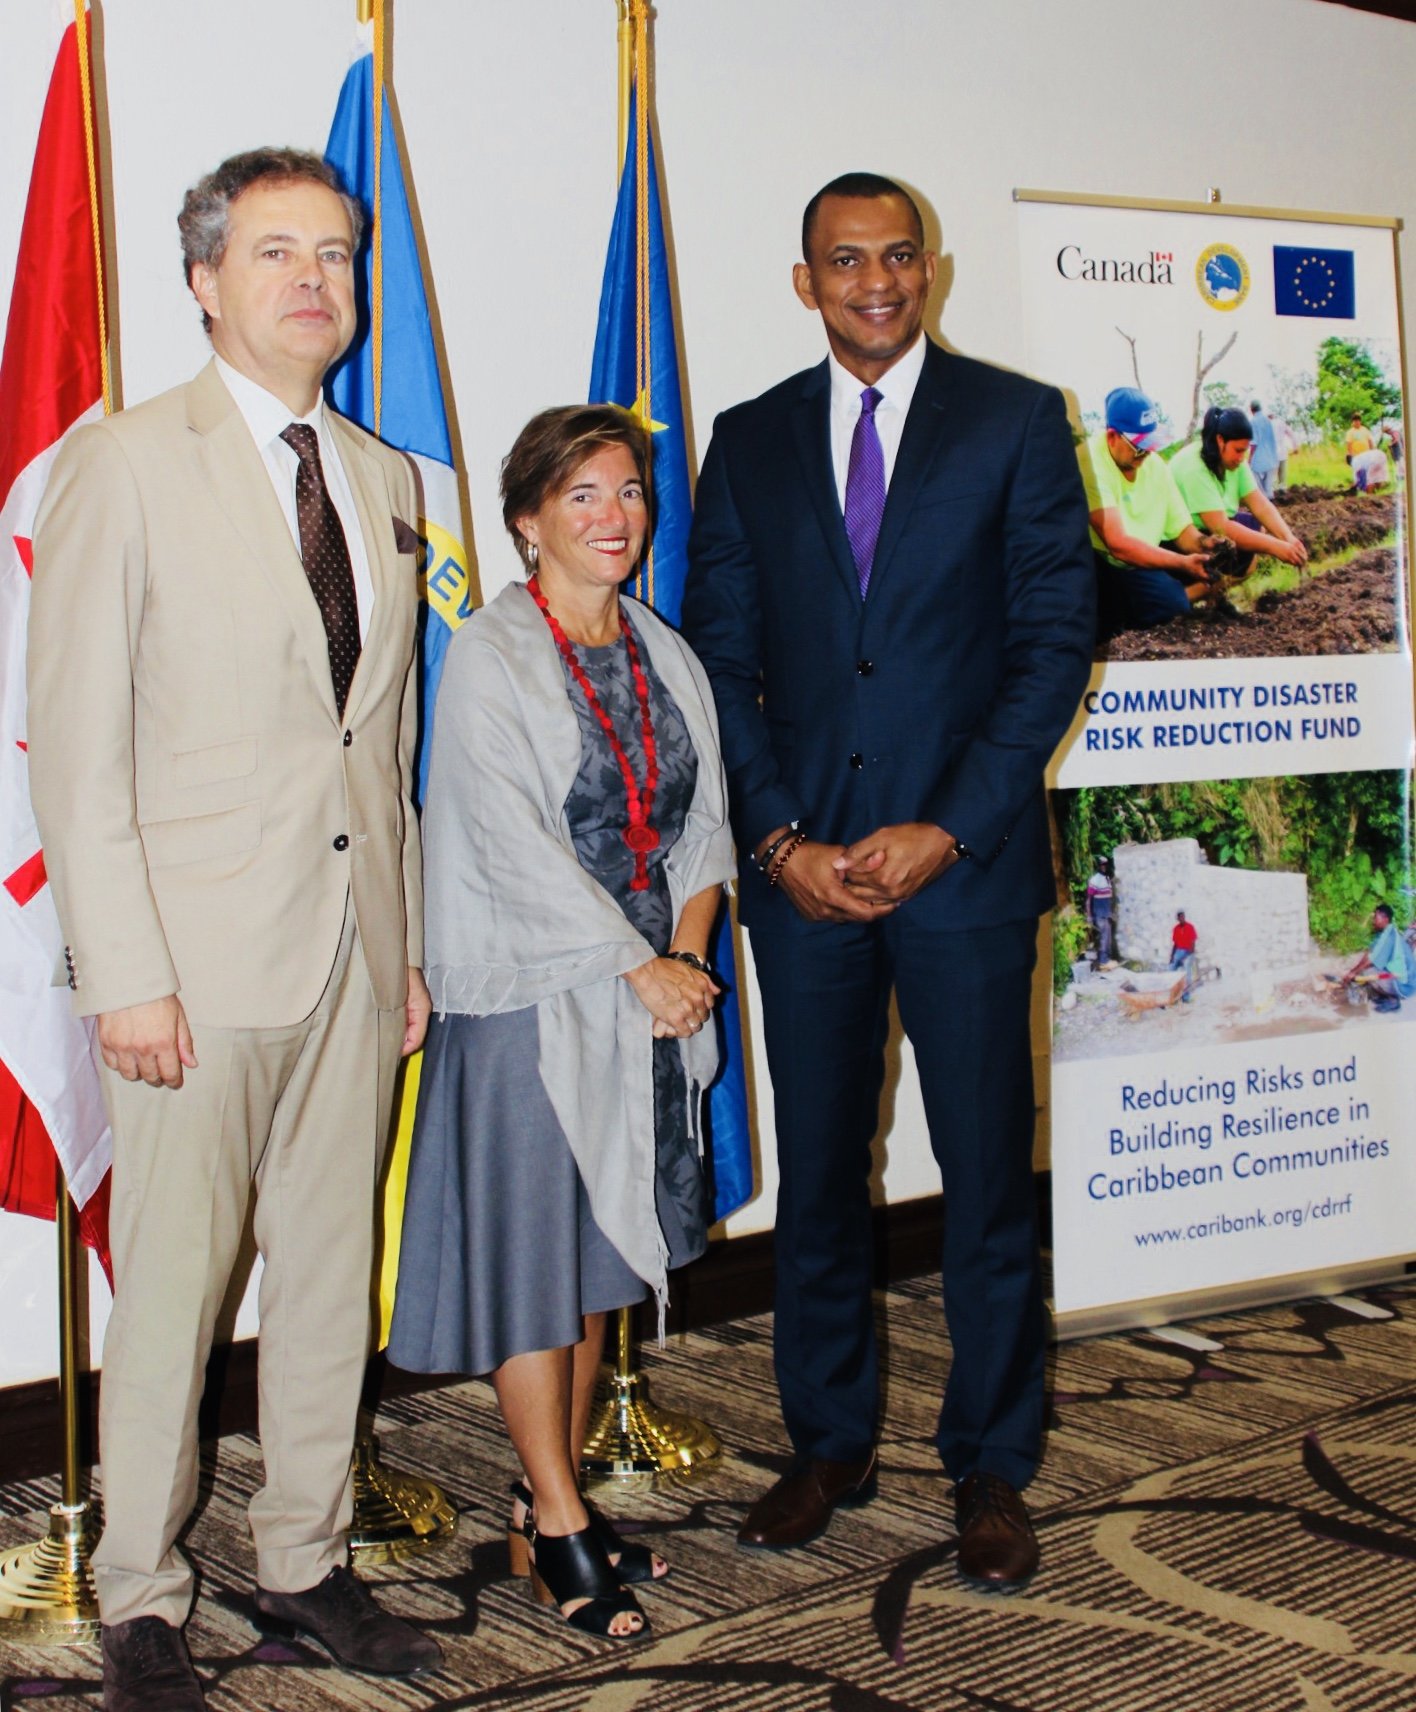 Left to Right: Luis Maia, Head of Cooperation, Development Cooperation Section, Delegation of the European Union to Barbados, the Eastern Caribbean States, the OECS and CARICOM/CARIFORUM; Her Excellency Ms. Marie Legault, High Commissioner of Canada to Barbados and the Eastern Caribbean; Daniel Best, Director, Projects, CDB.